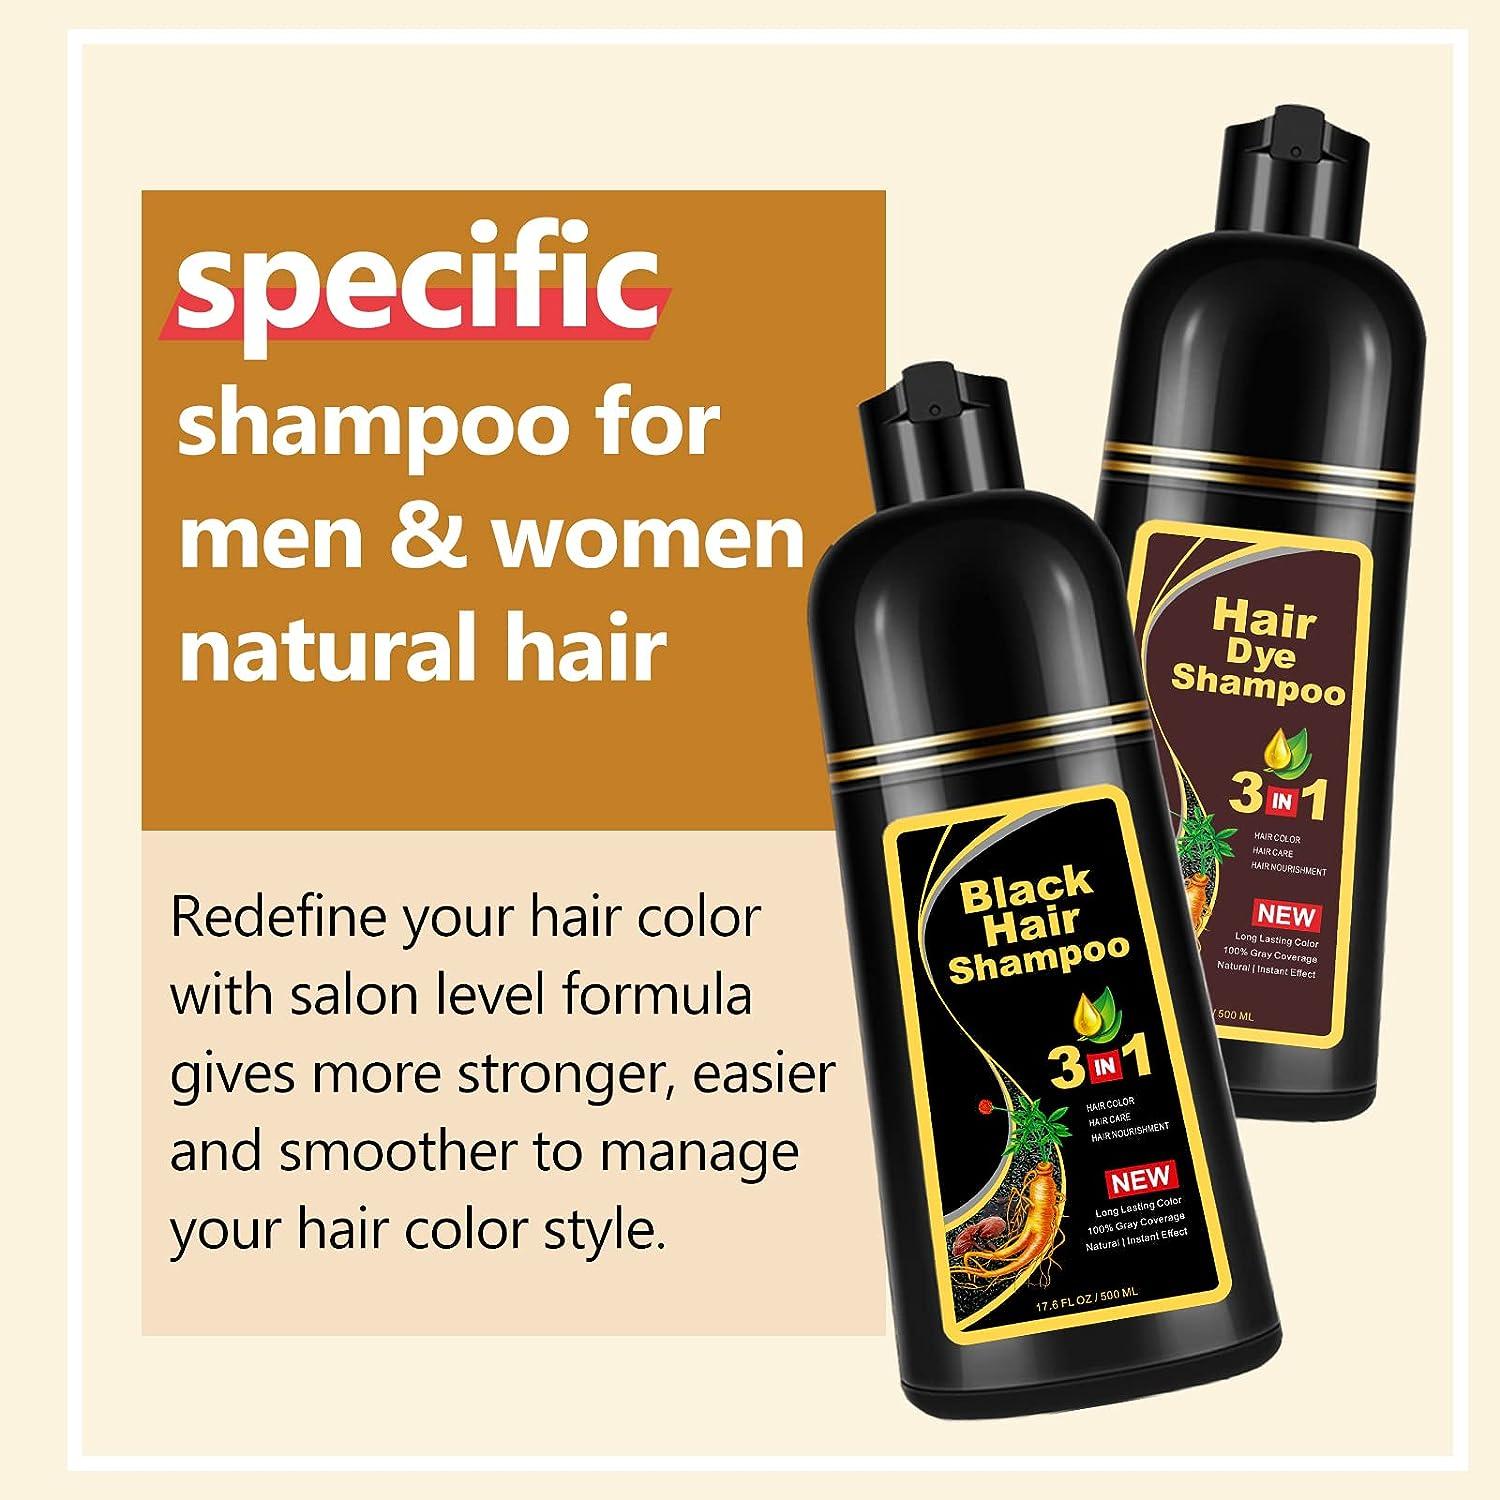 Buy LOBE MIRACLE Hair Dye Shampoo 3 in 1 for White/Gray Hair, Natural  Herbal Hair Color Shampoo for Men and Women, Instant Herbal Ingredients  Hair Dye Coloring Shampoo Online at Best Prices